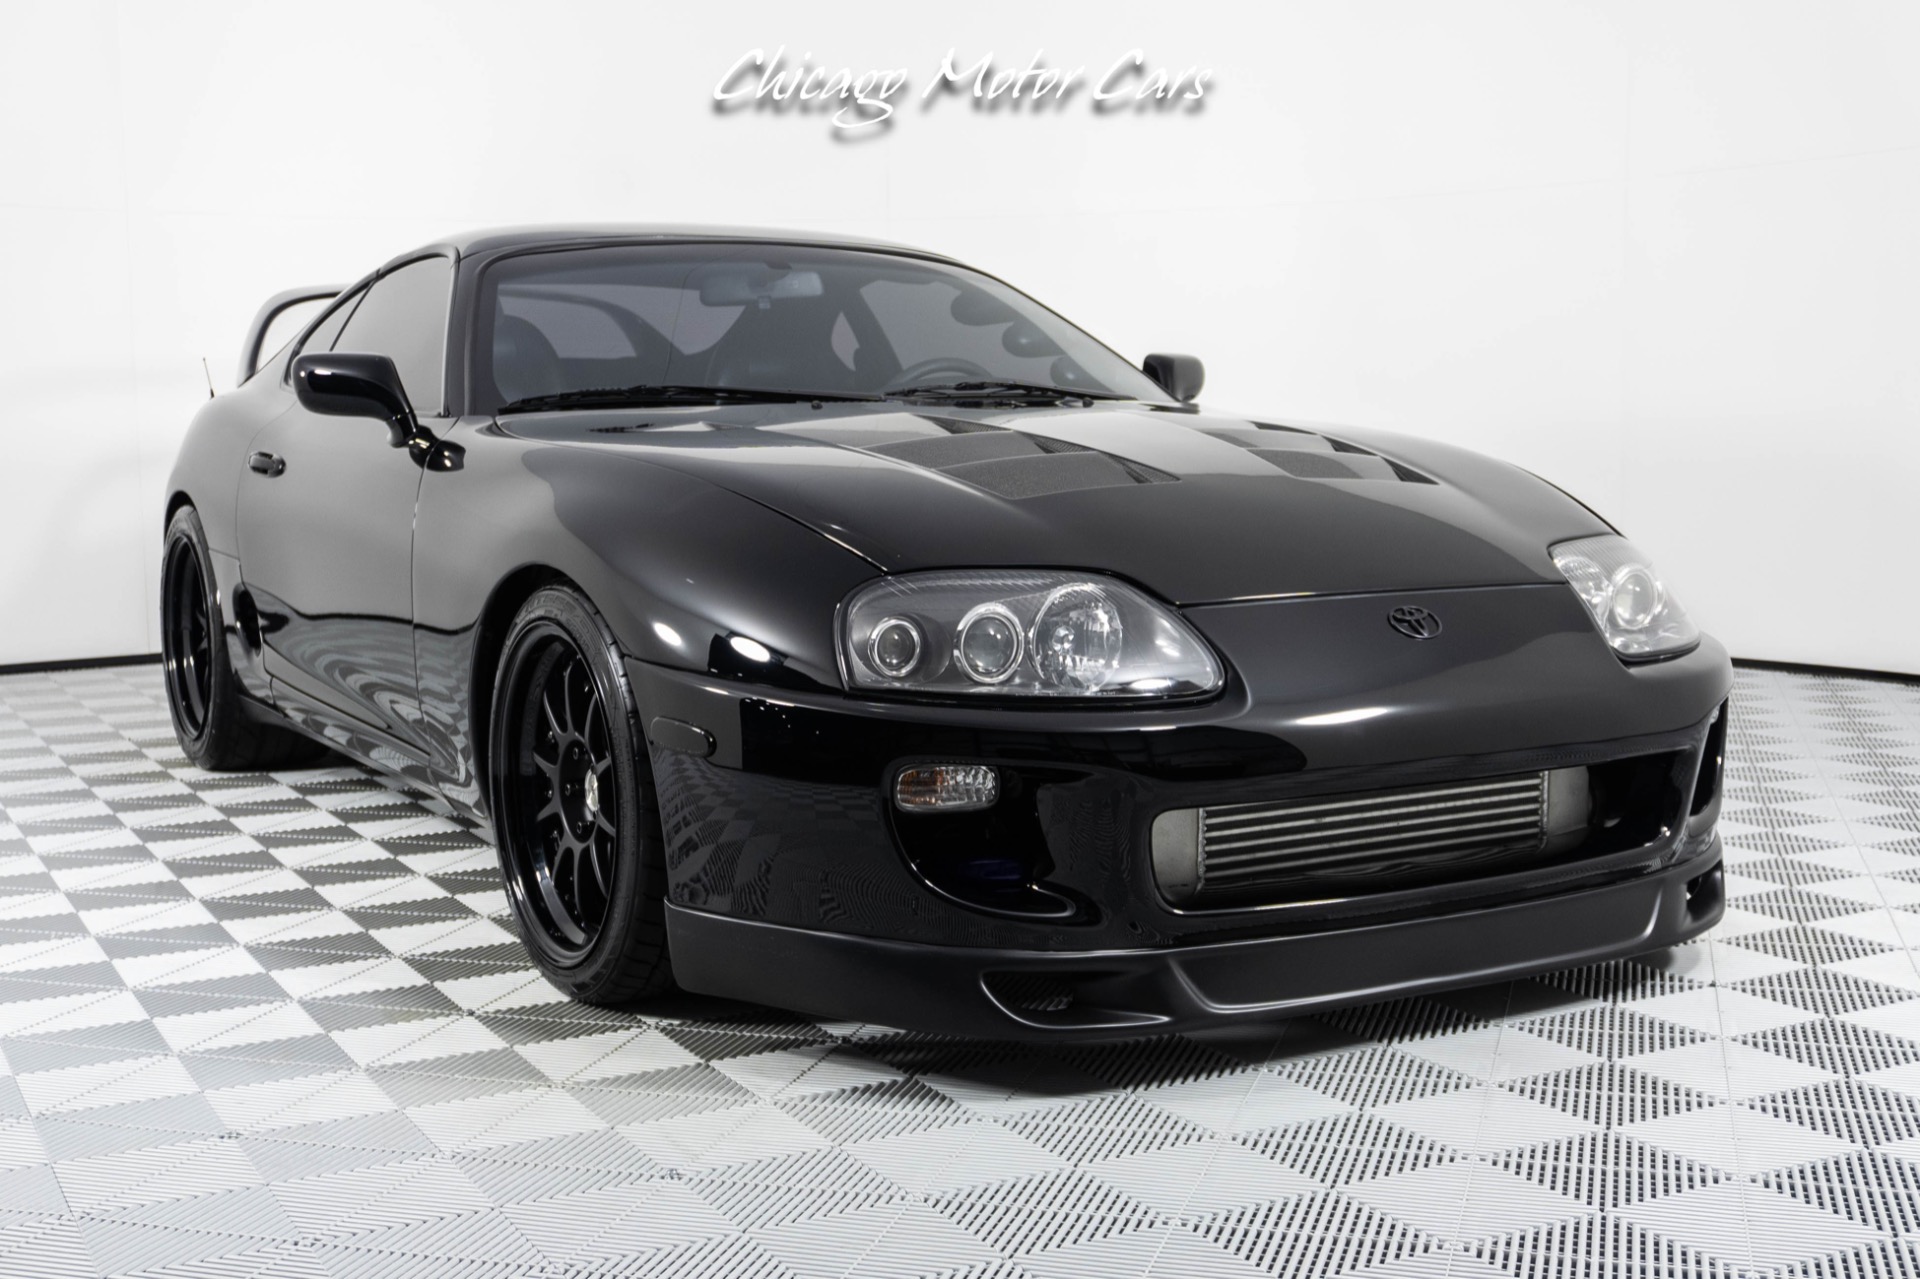 Used 1993 Toyota Supra Mk4 6-Spd! 1,000+ WHP! Real St. Performance